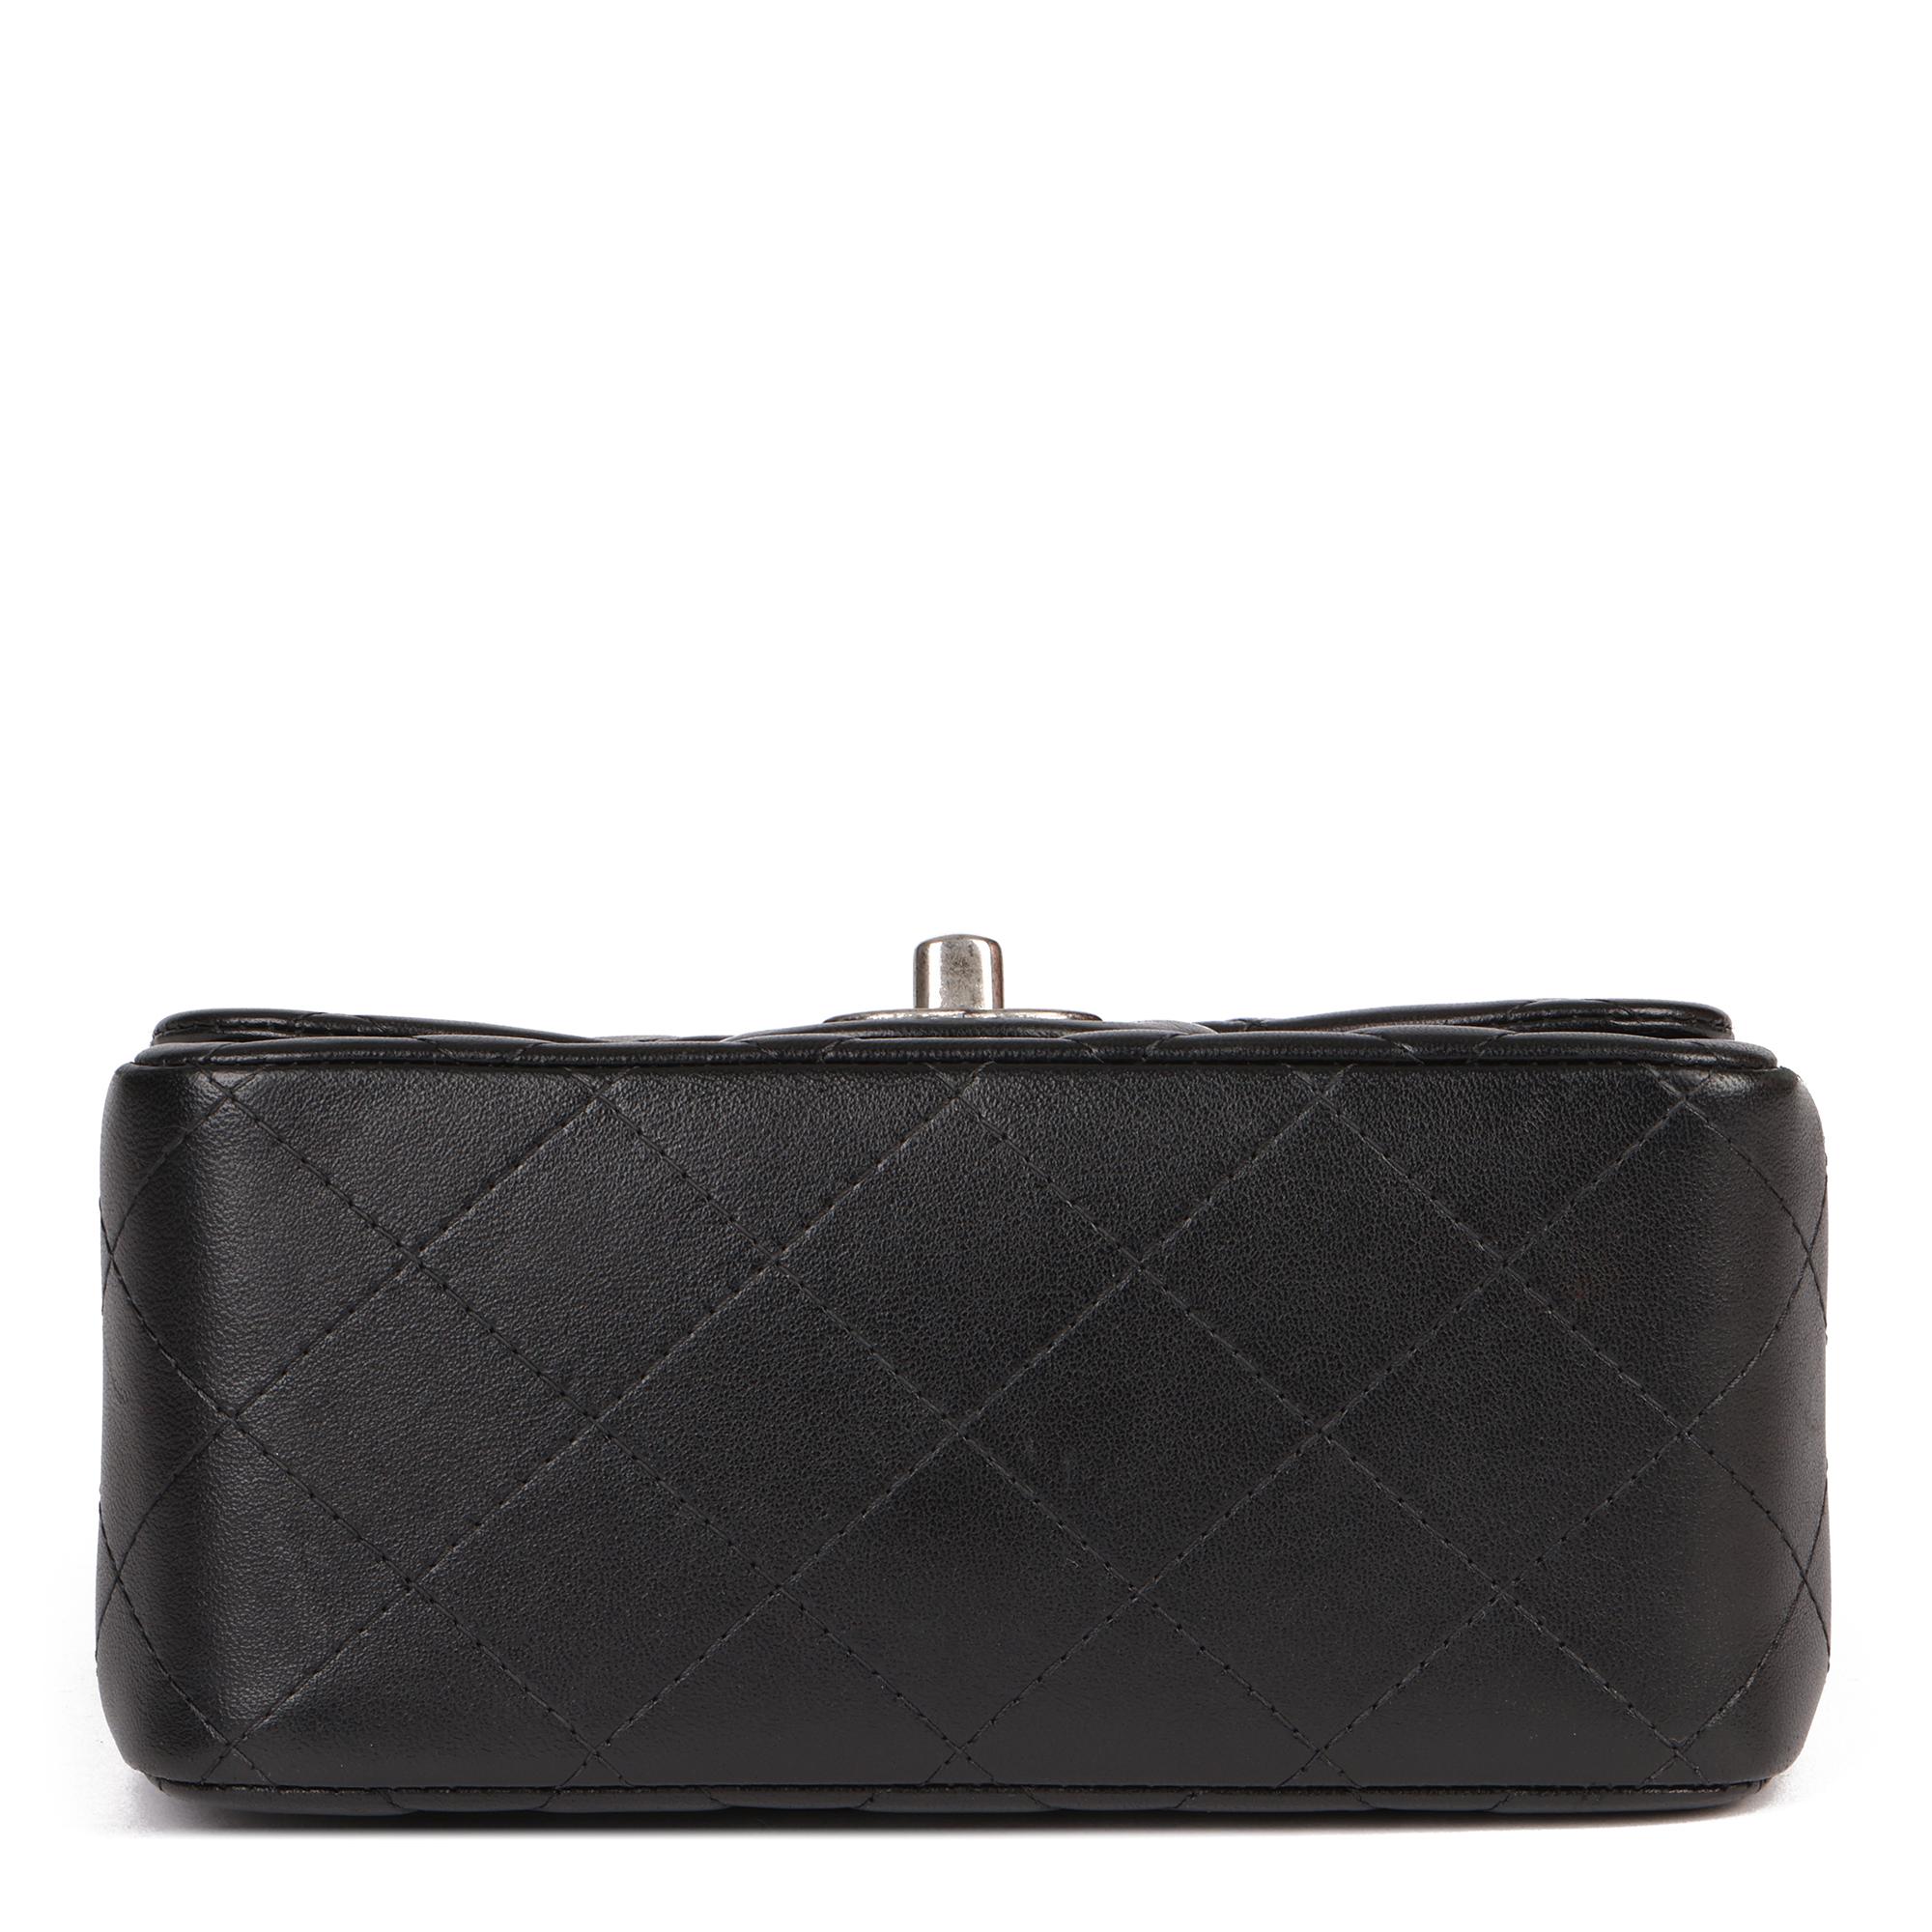 Chanel 2015 Black Quilted Lambskin Leather Mini Flap Bag 4